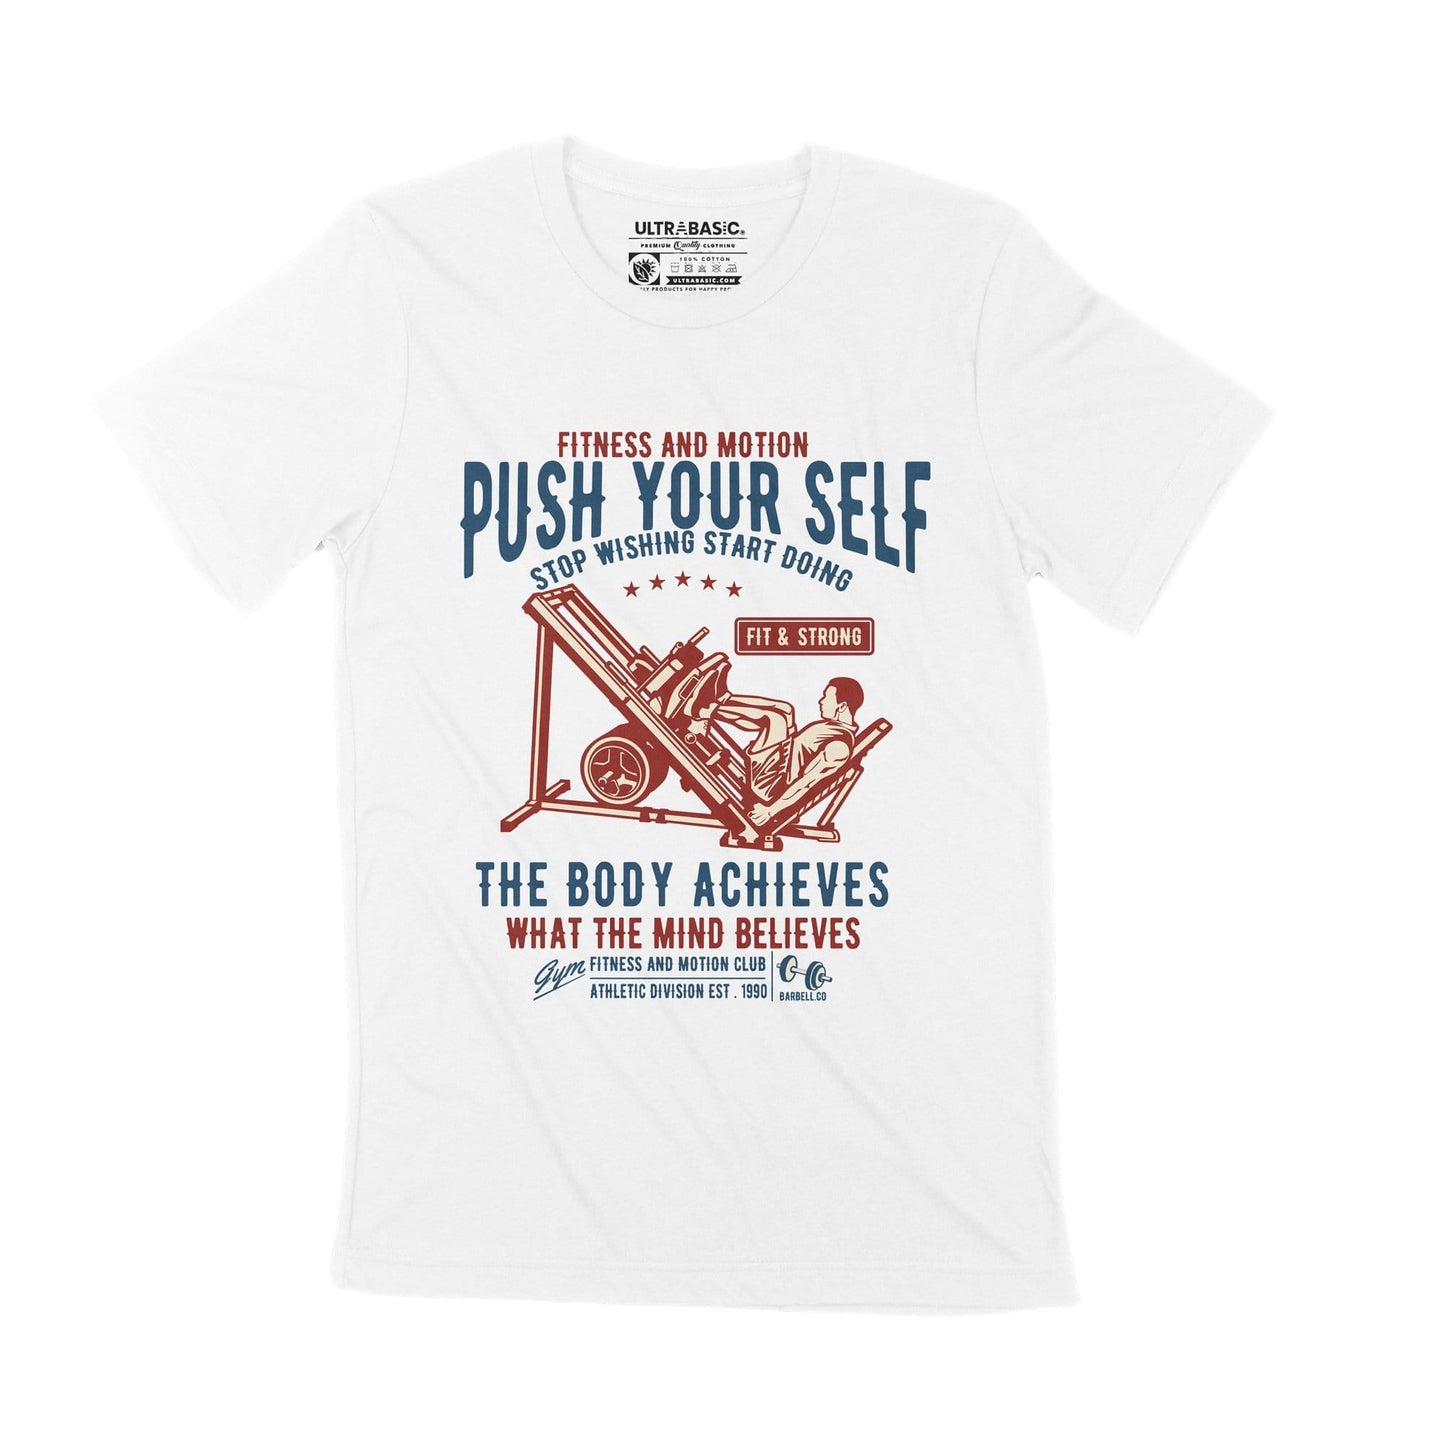 ULTRABASIC Men's T-Shirt Fitness and Motion Push Your Self - Gym Motivational Tee Shirt